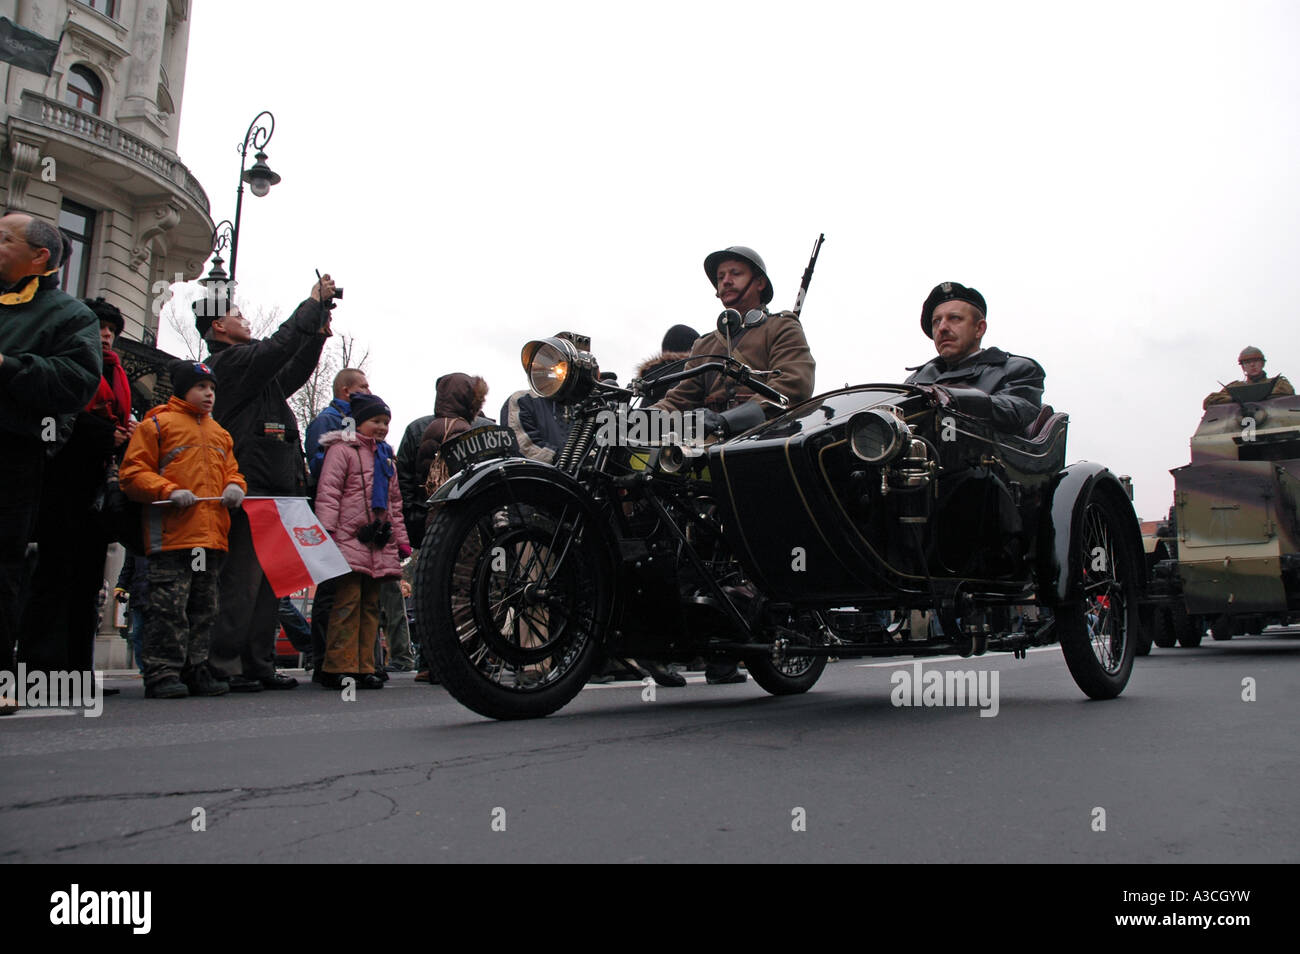 Review of polish historical forces on 11 November Independence Day in Warsaw, Poland. Royal Enfield motorcycle from 1915. Stock Photo